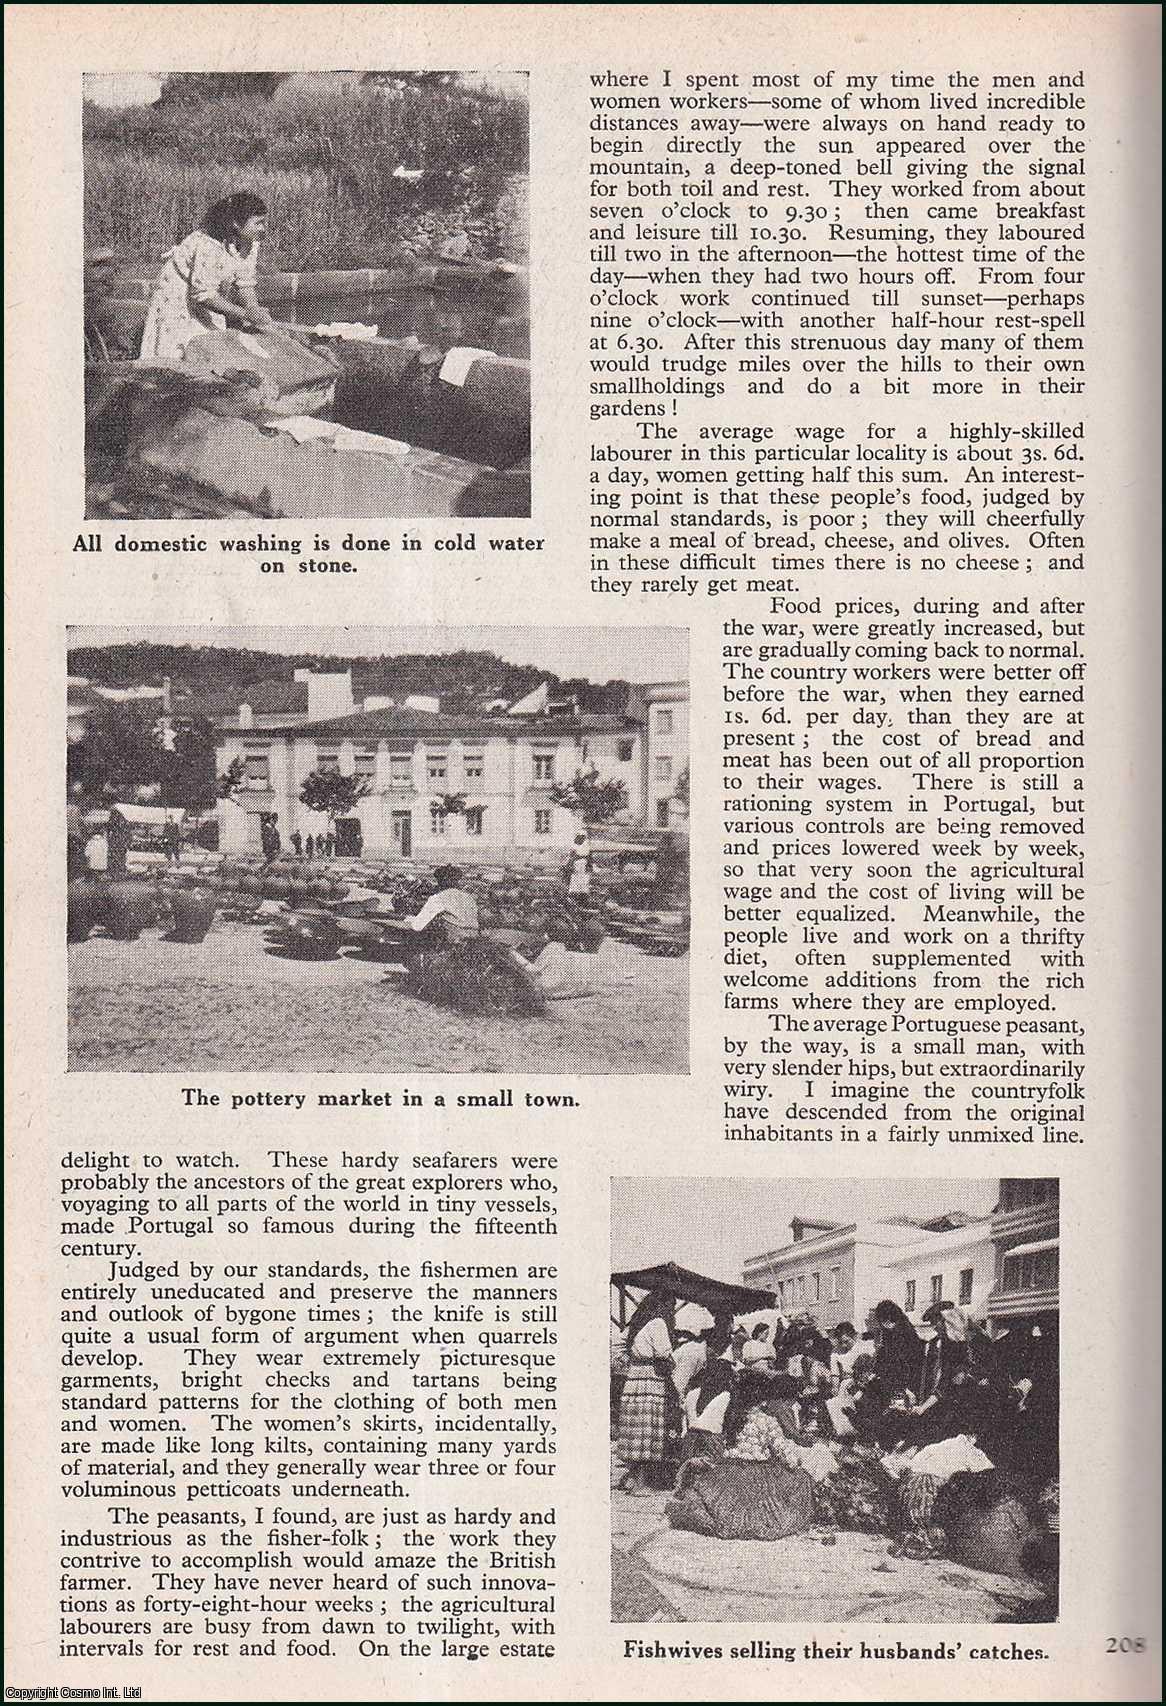 Huldine V. Beamish - Picturesque Portugal. An uncommon original article from the Wide World Magazine, 1948.